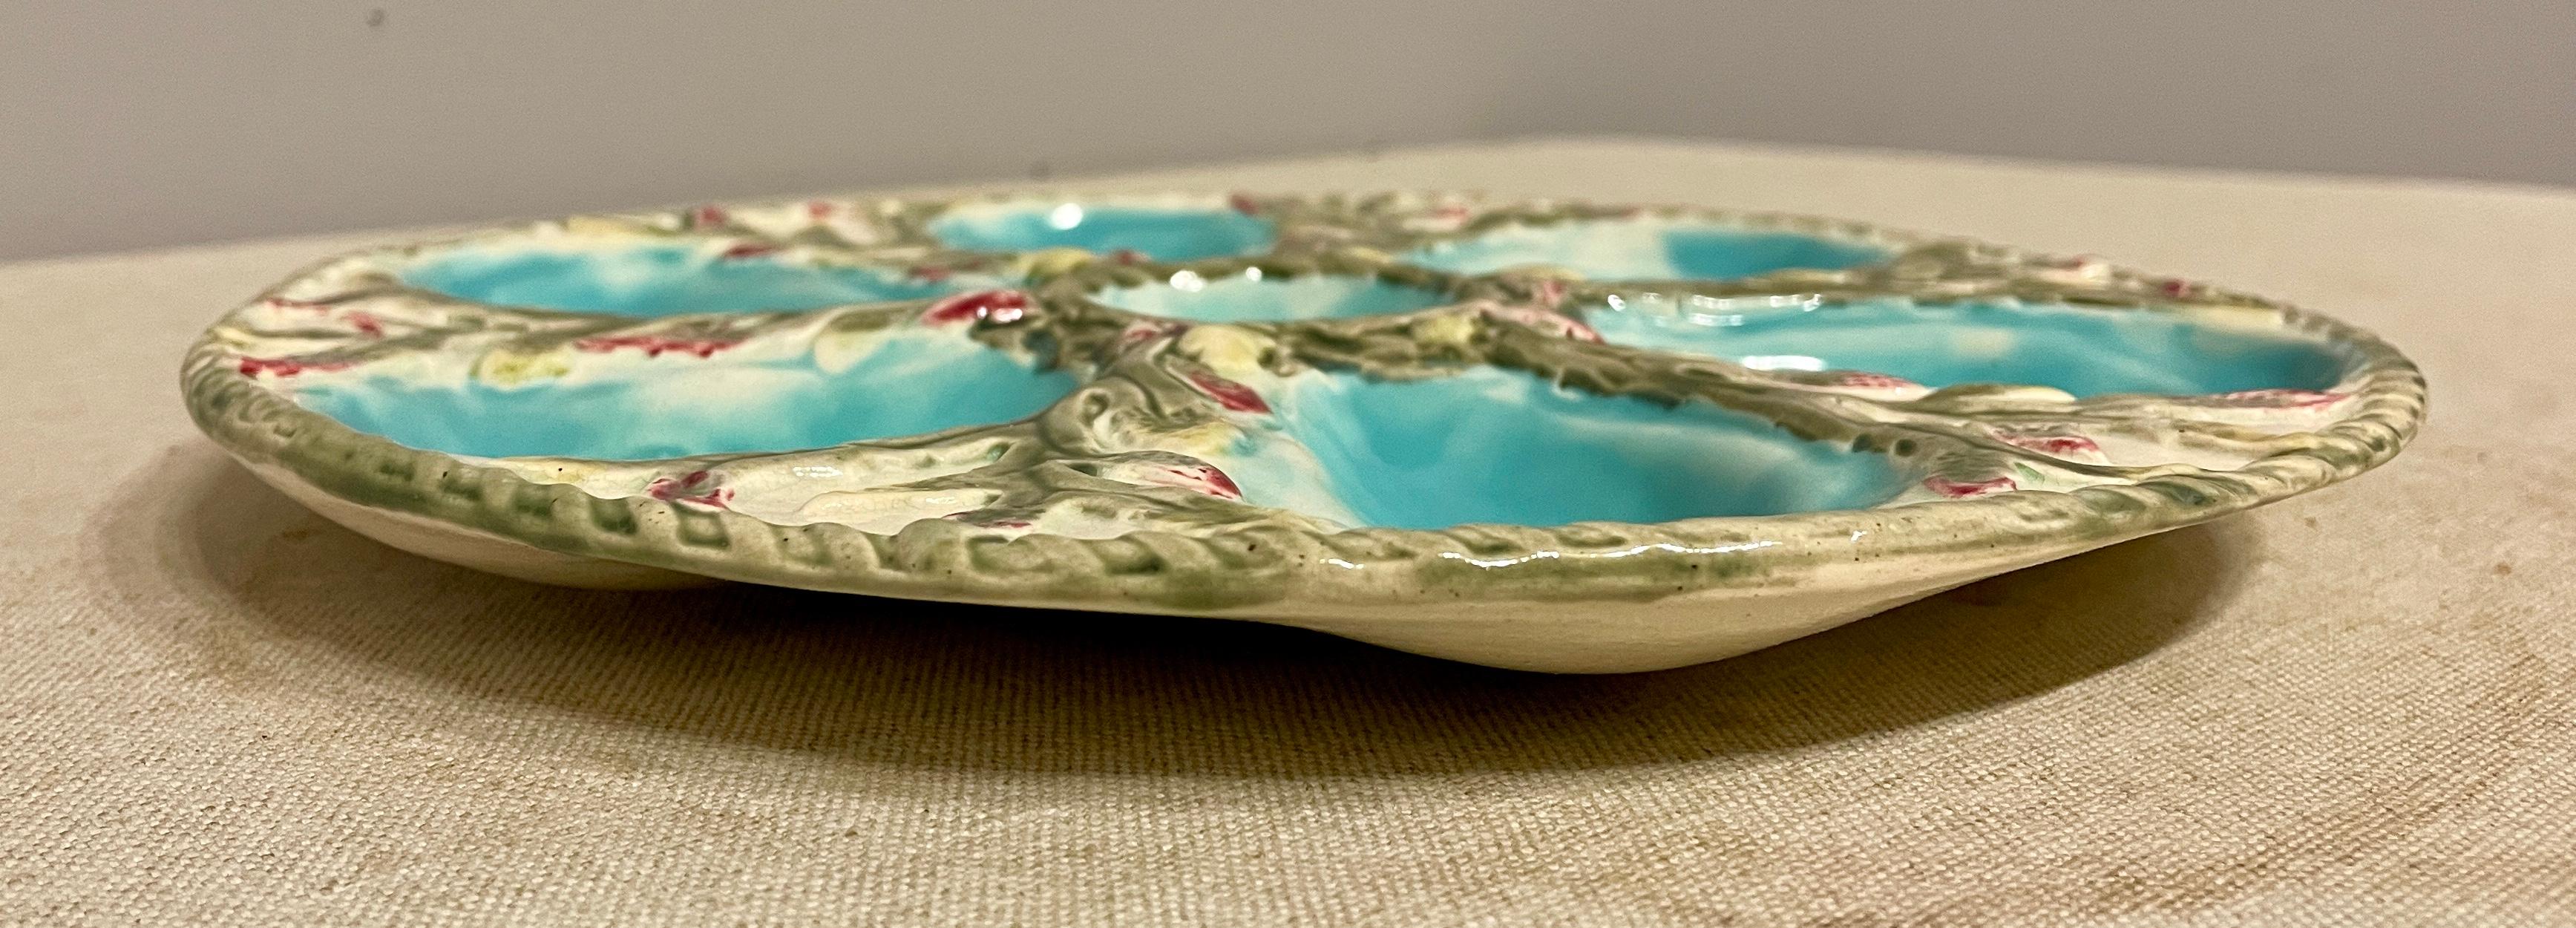 19th C. English Majolica Fielding Oyster Plate 3